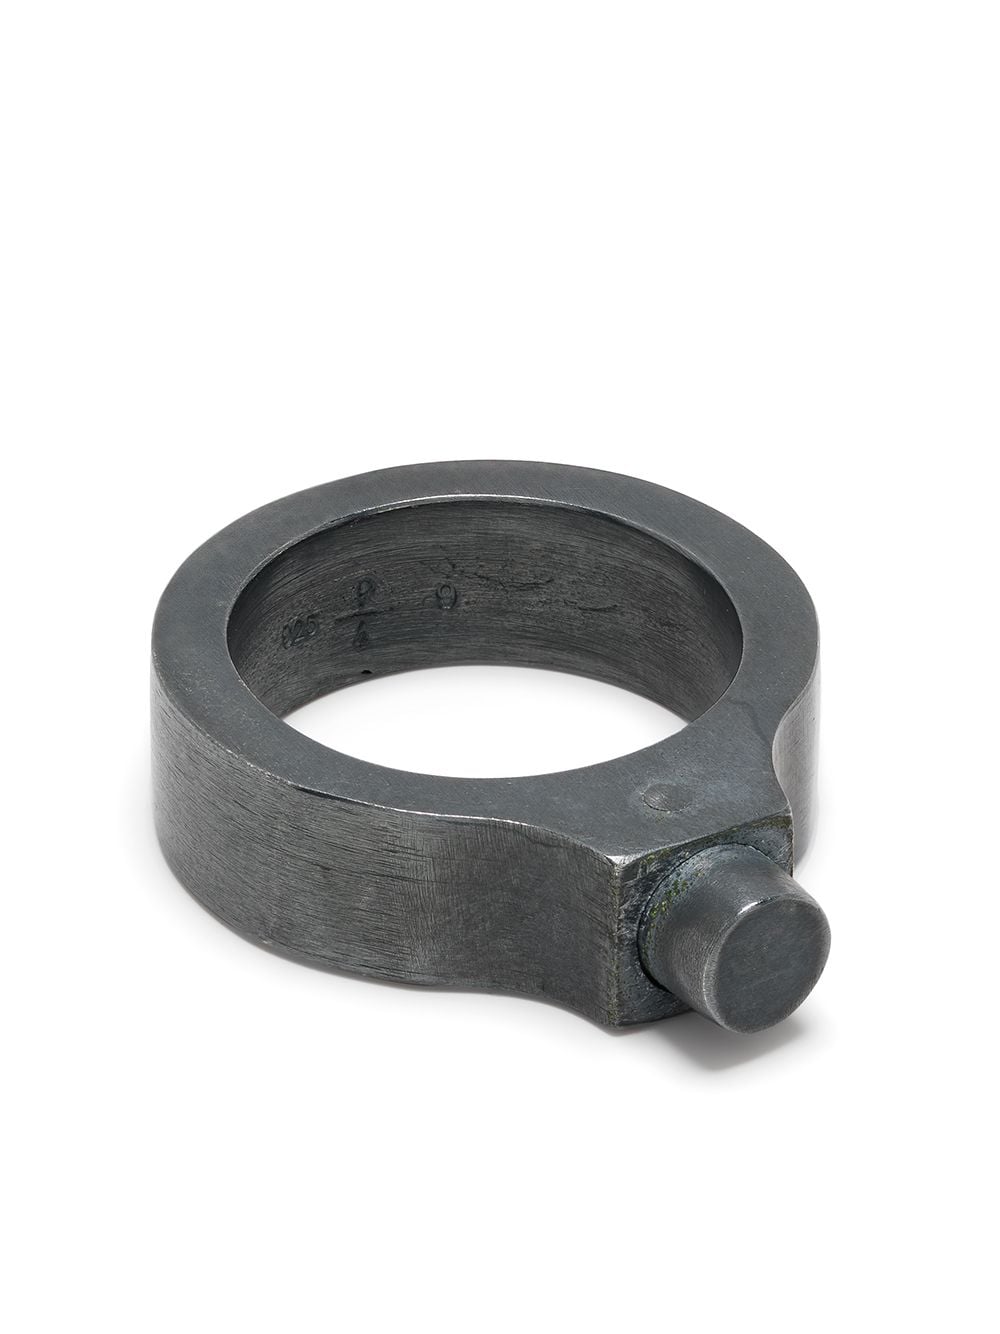 Parts of Four Sahara 7mm ring - Grey von Parts of Four